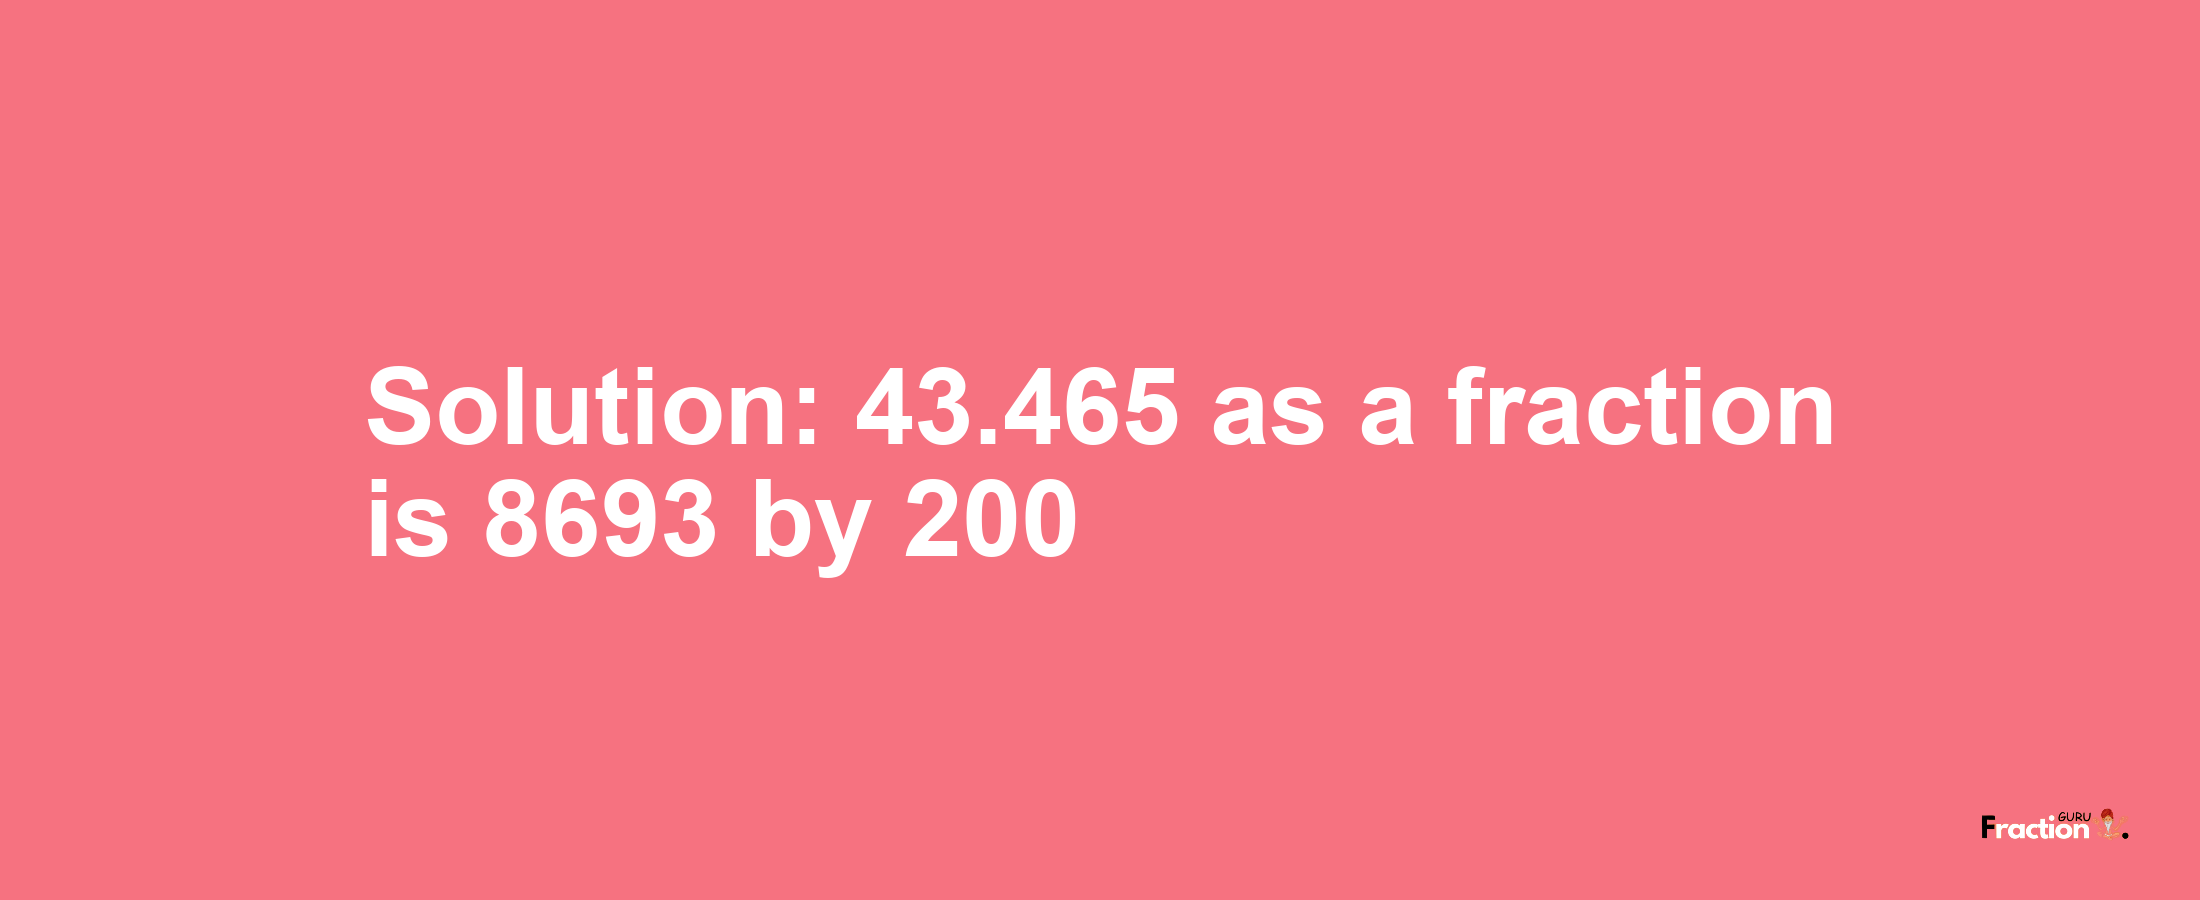 Solution:43.465 as a fraction is 8693/200